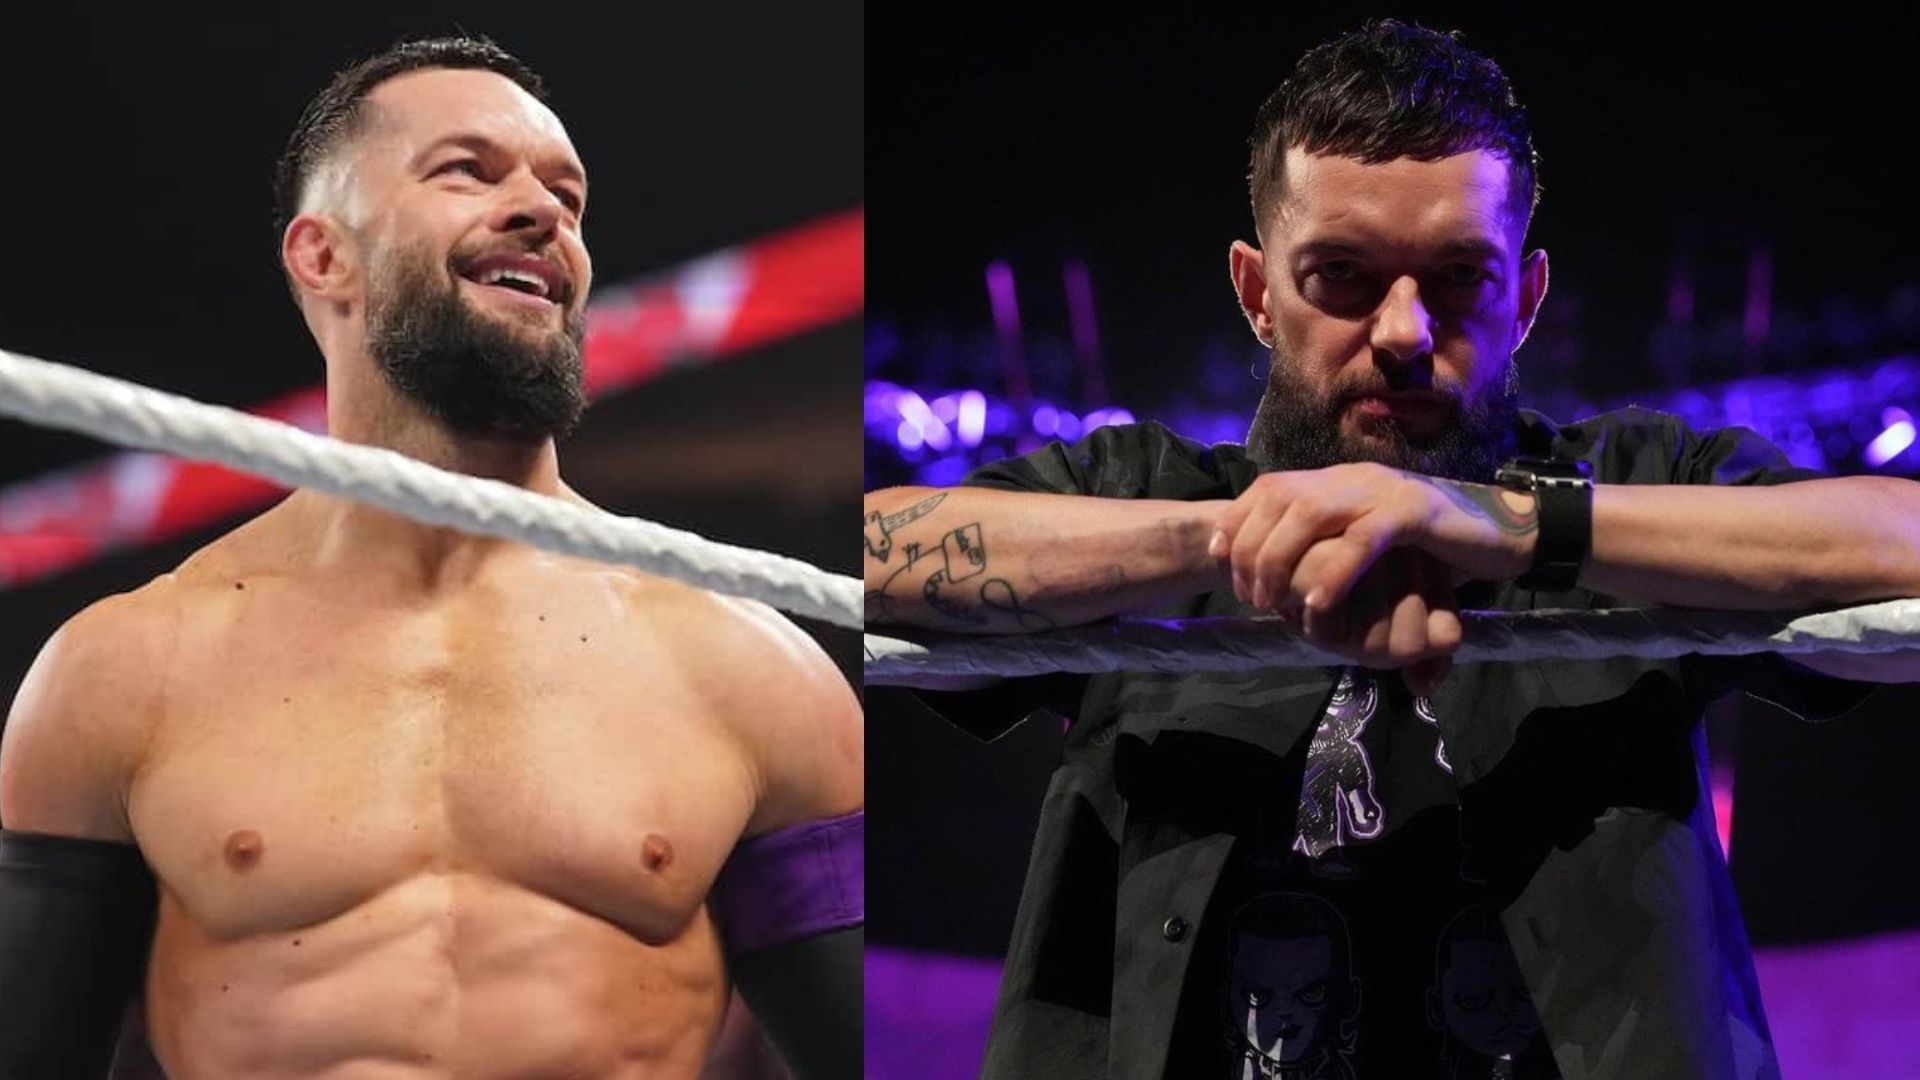 Finn Balor is a part of The Judgment Day faction on RAW.